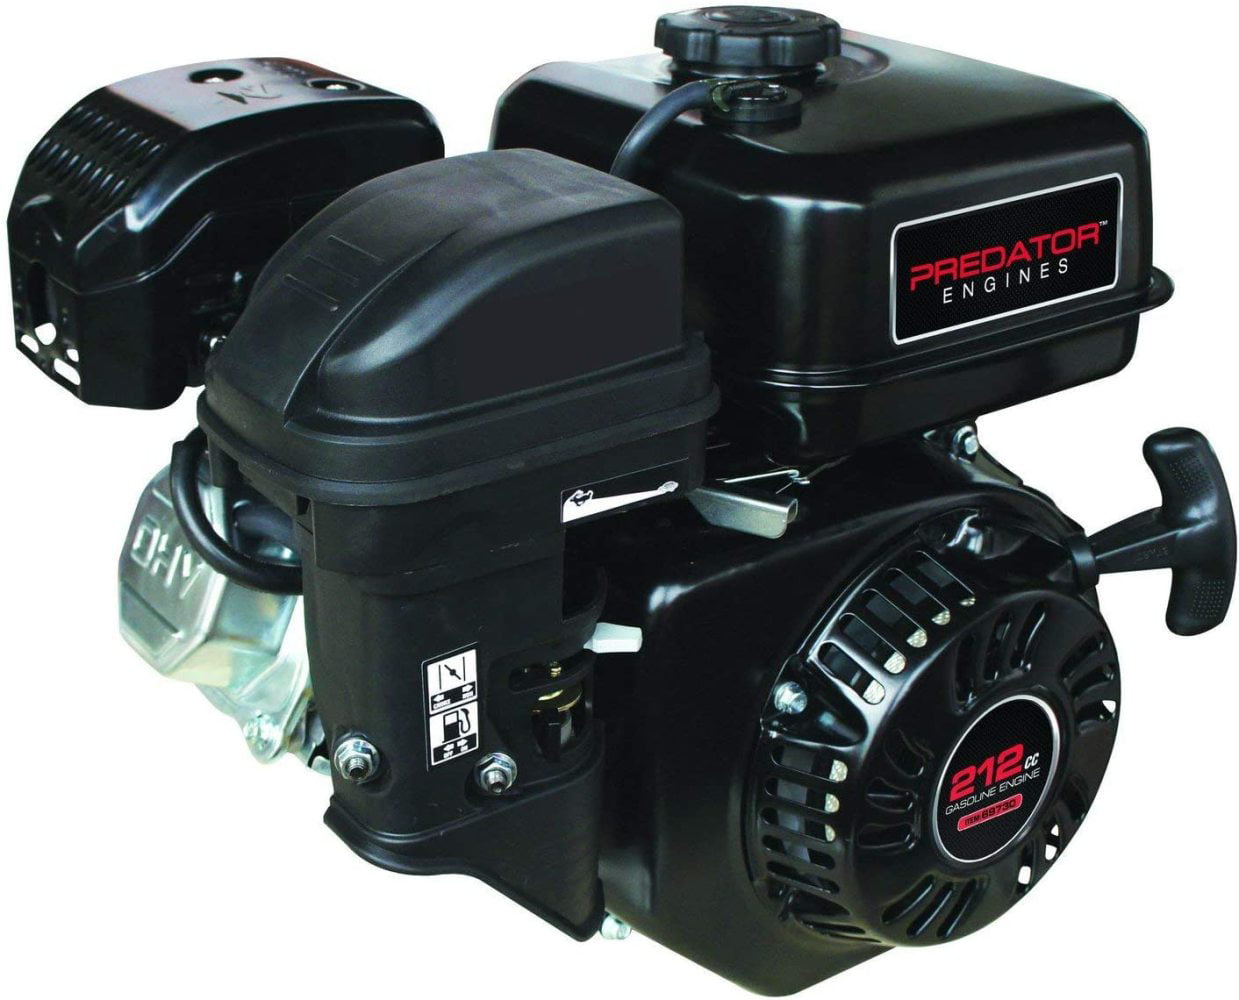 Horizontal New 6.5HP Gas Engine Motor Recoil Start Fast Free Shipping 